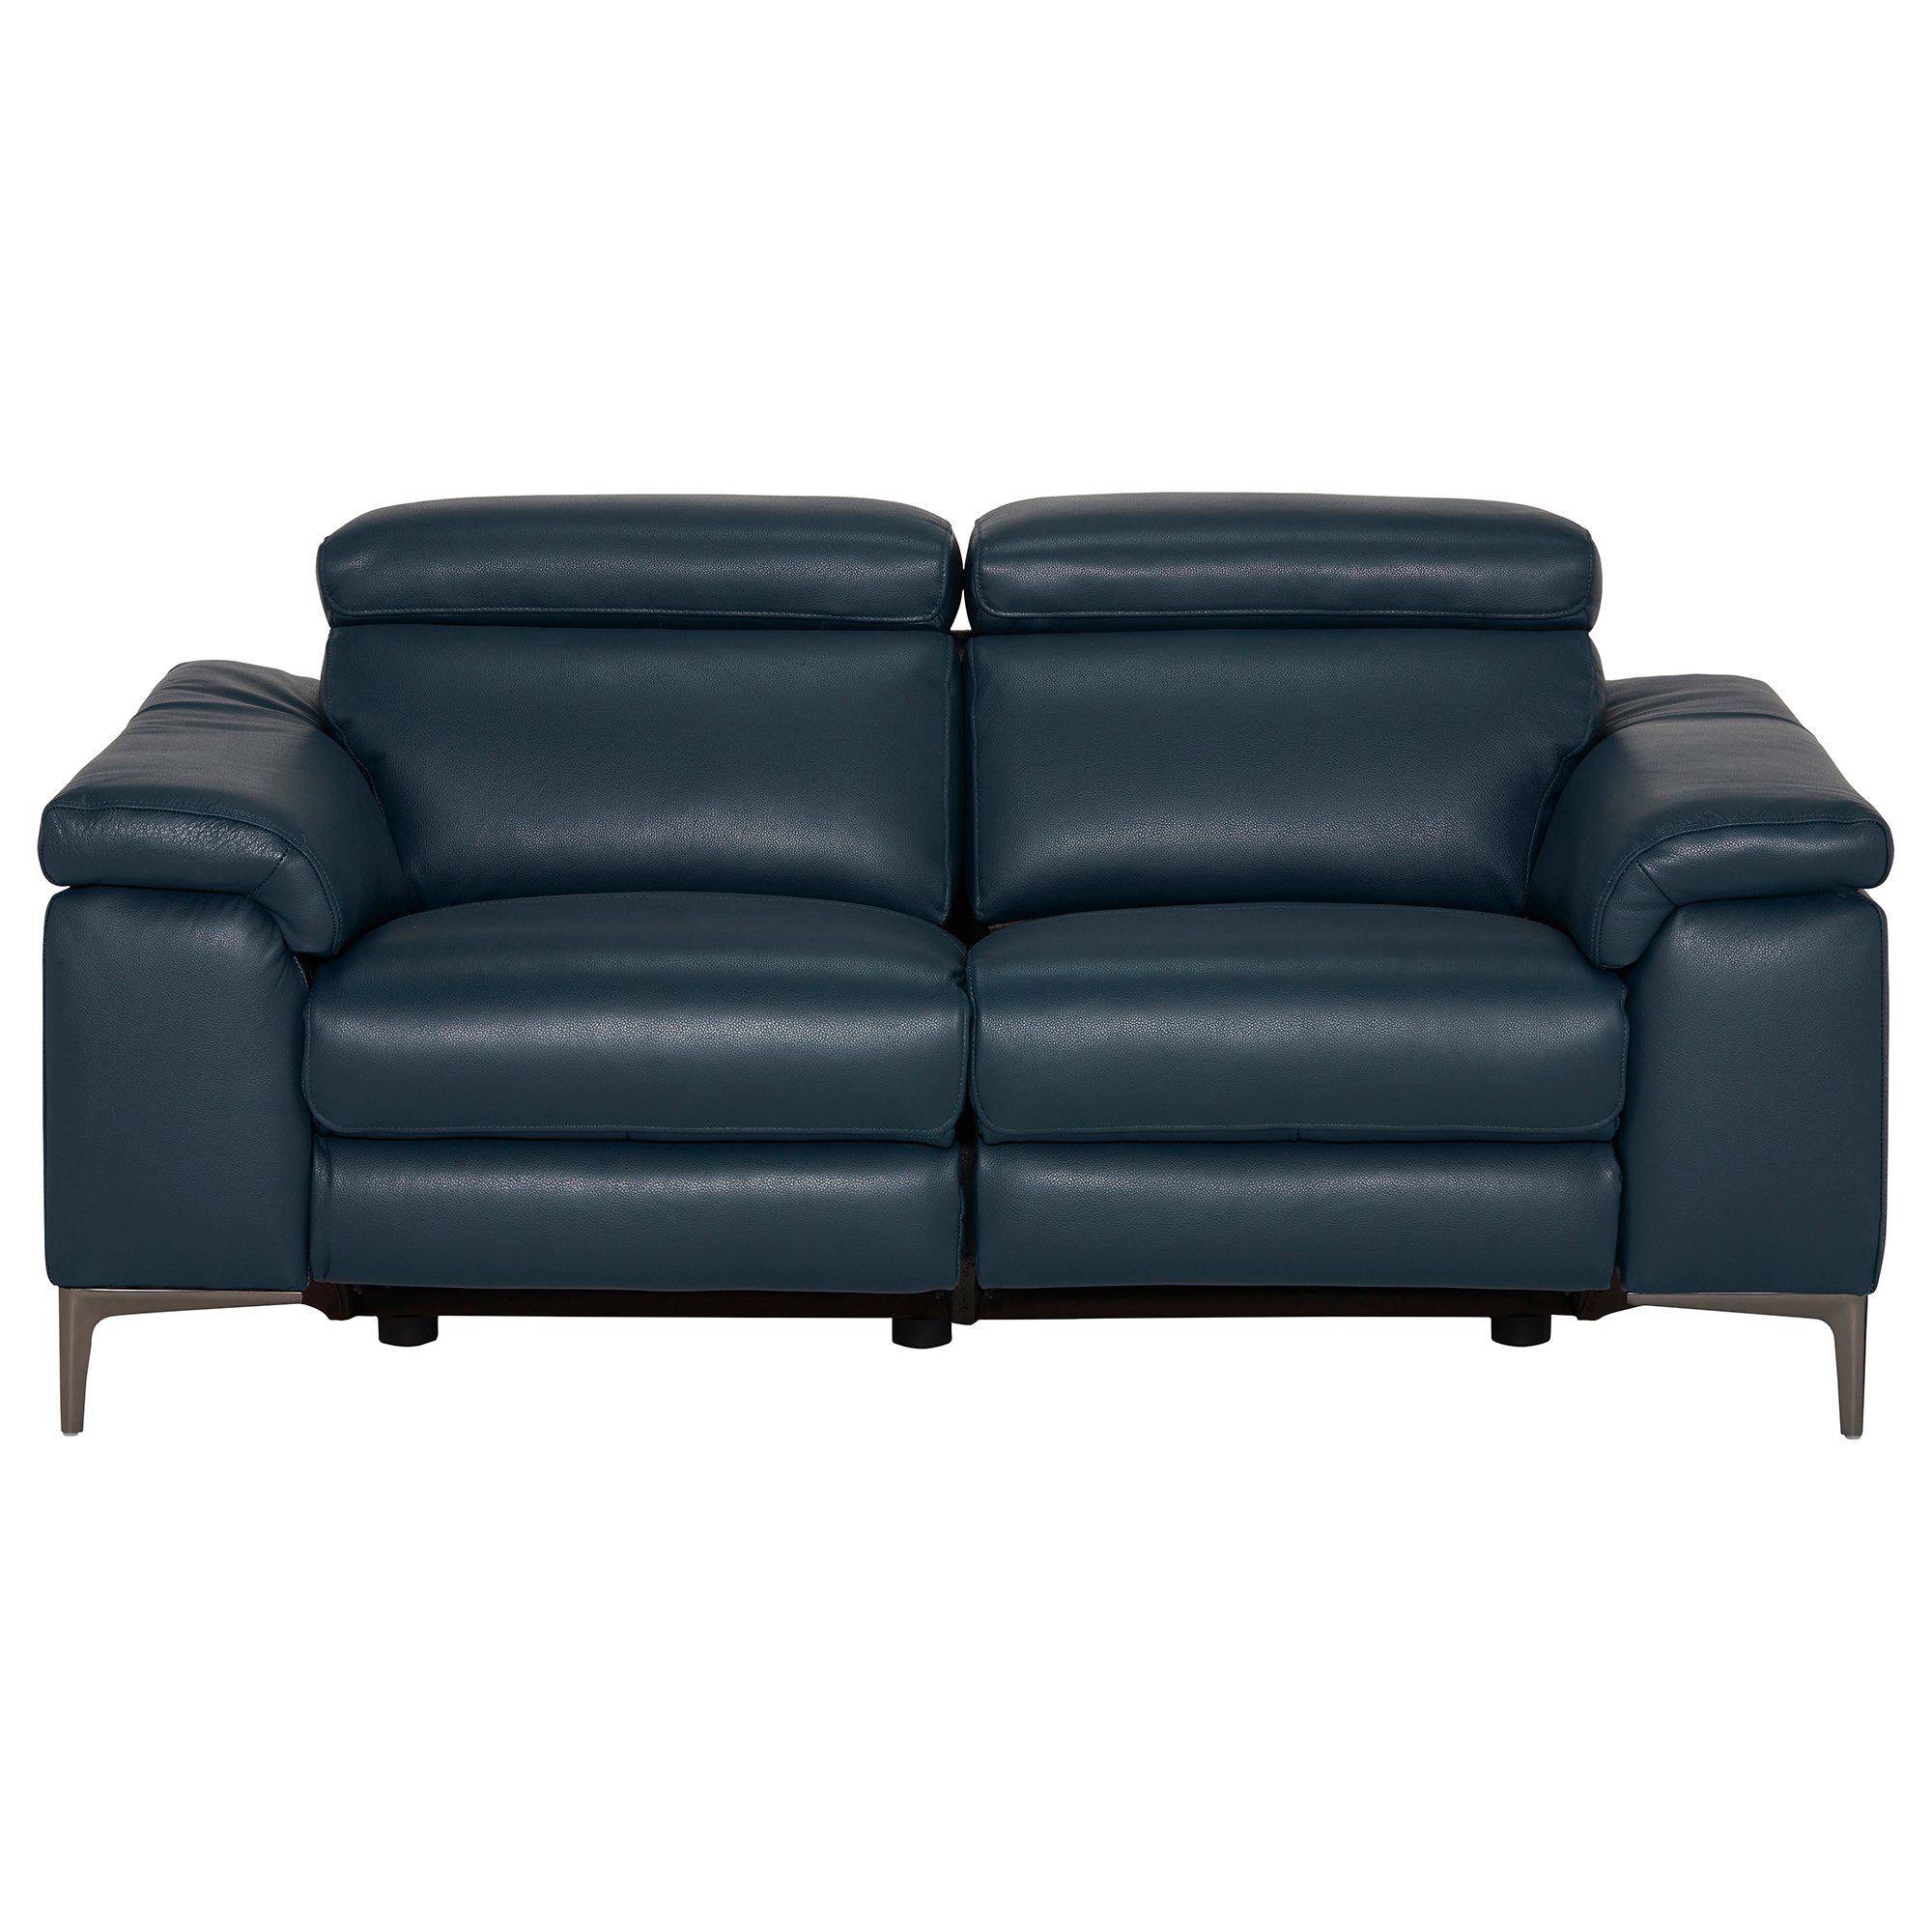 Paolo 2 Seater Recliner Sofa With 2 Electric Recliners, Blue Leather | Barker & Stonehouse